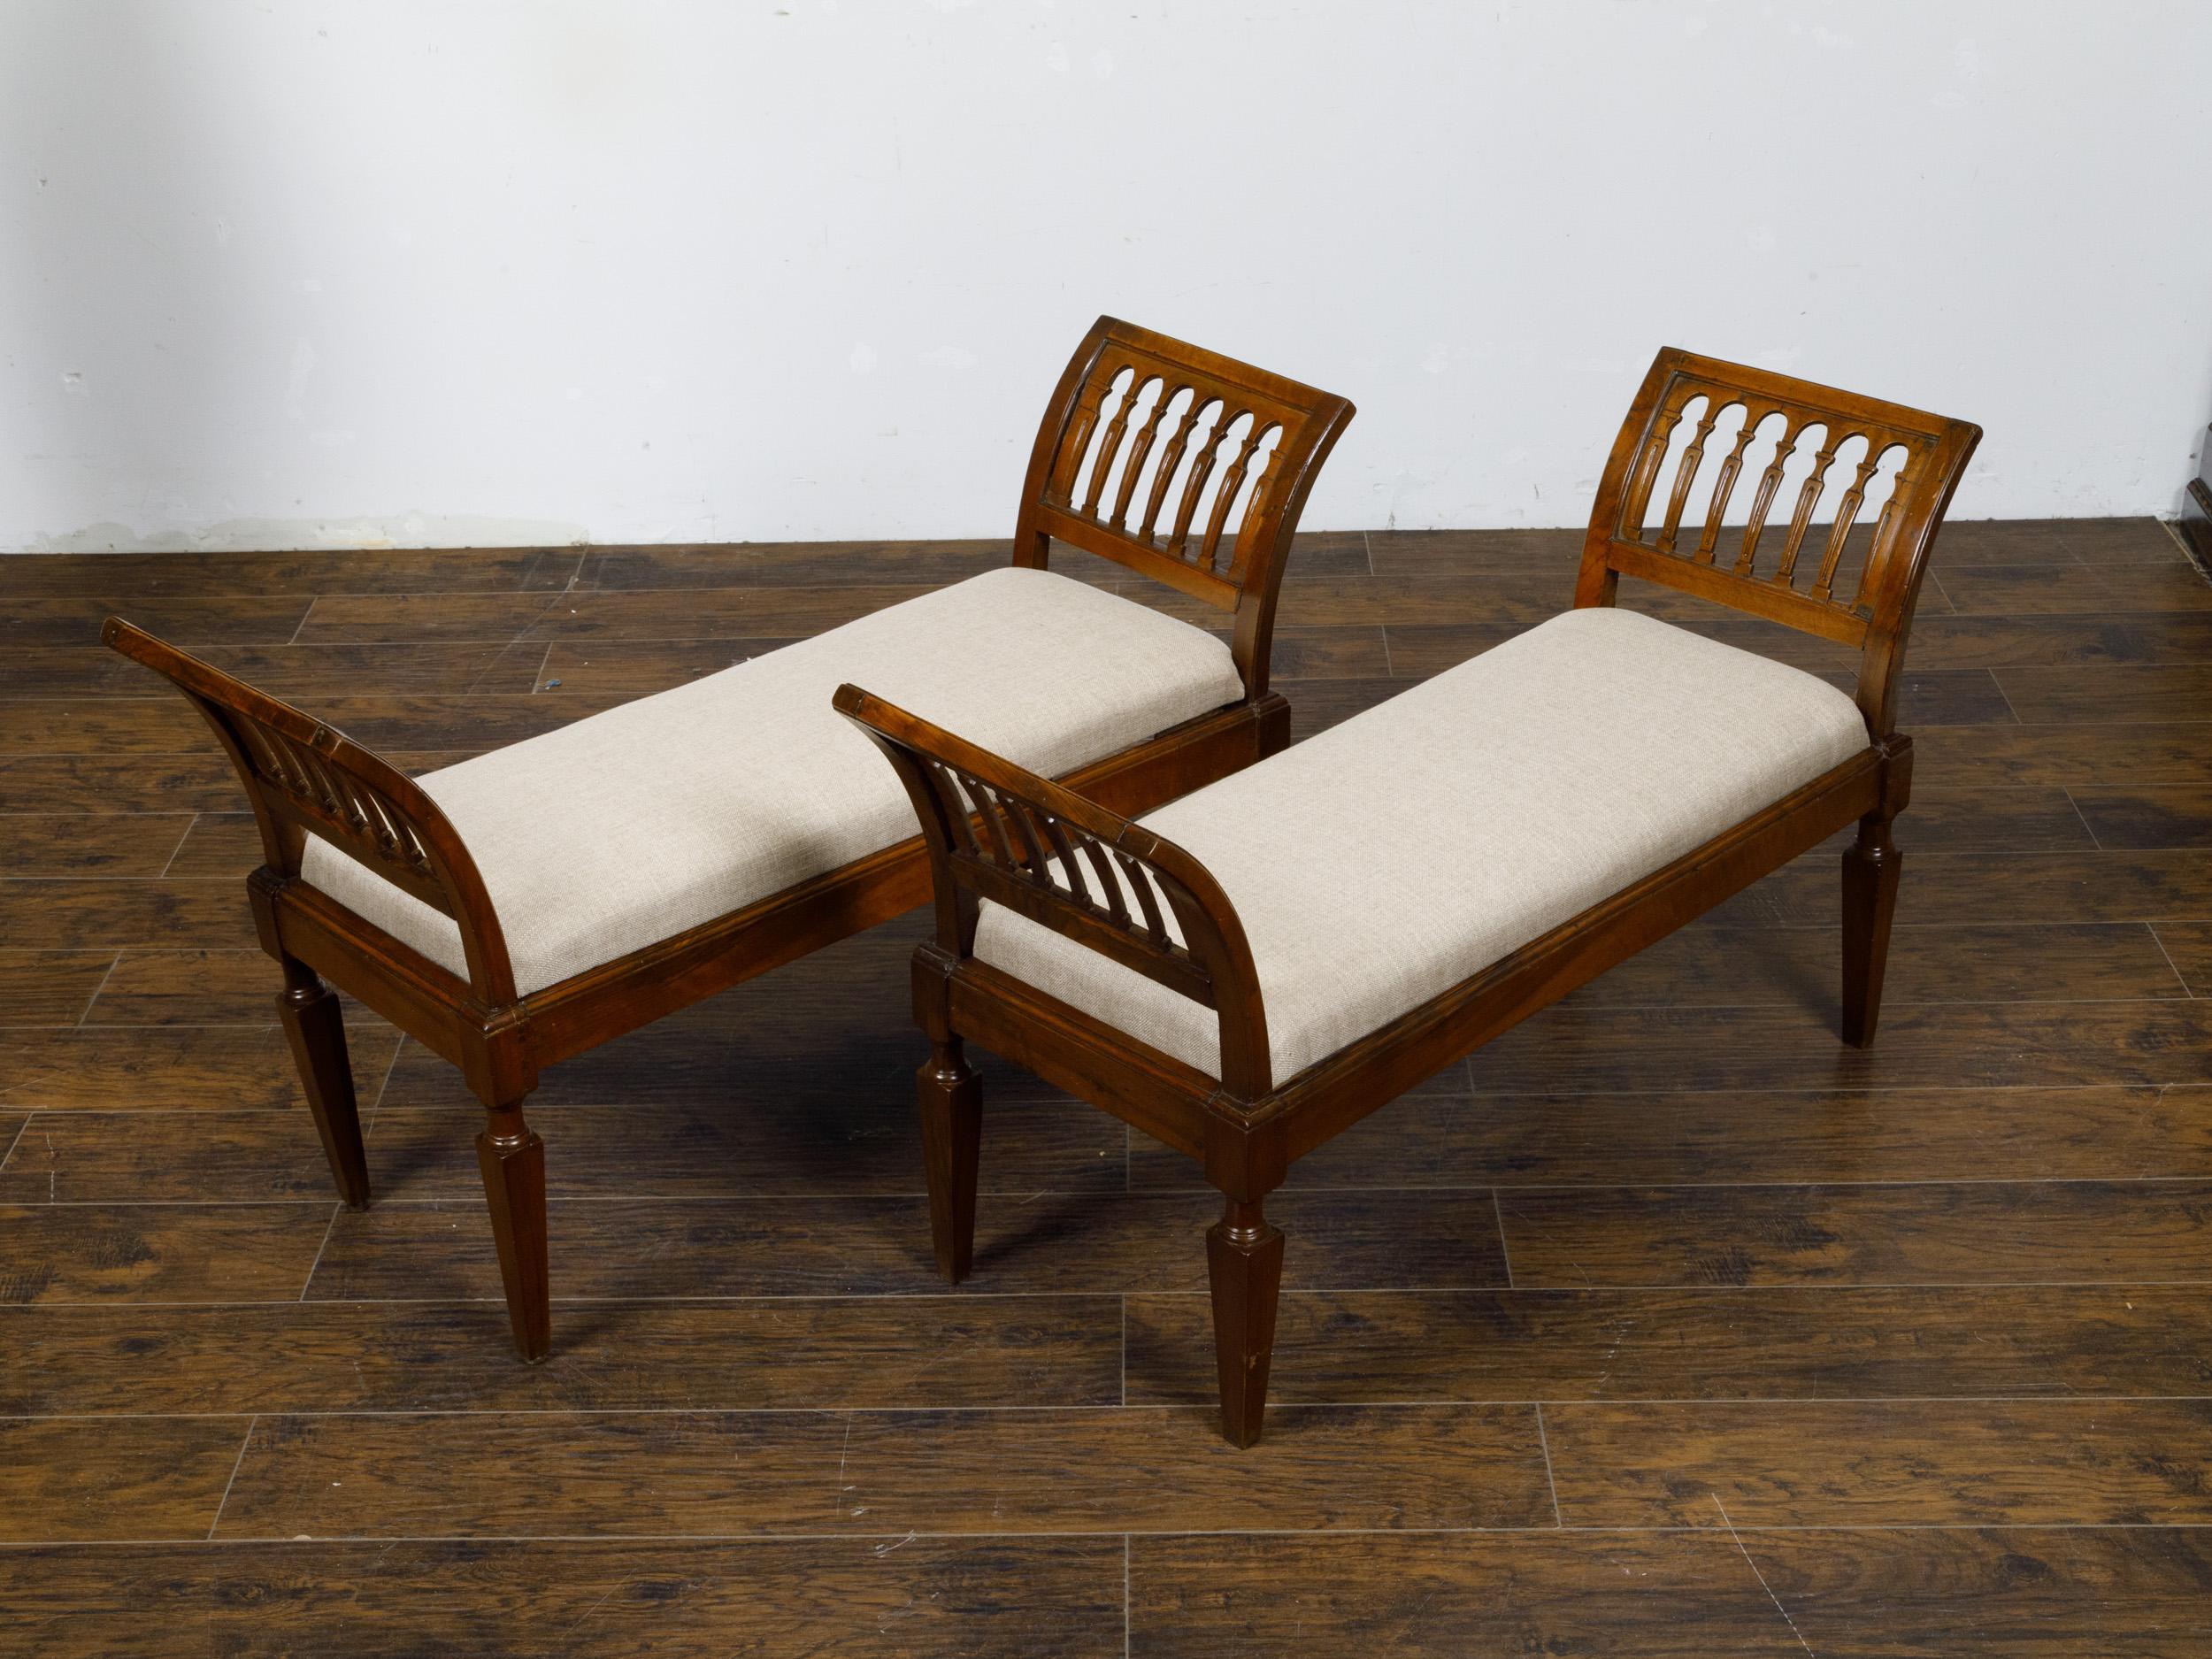 A pair of Italian walnut benches from the 19th century with out-scrolling side supports, tapered legs and new custom linen upholstery. This pair of Italian walnut benches from the 19th century effortlessly combines historic elegance with modern